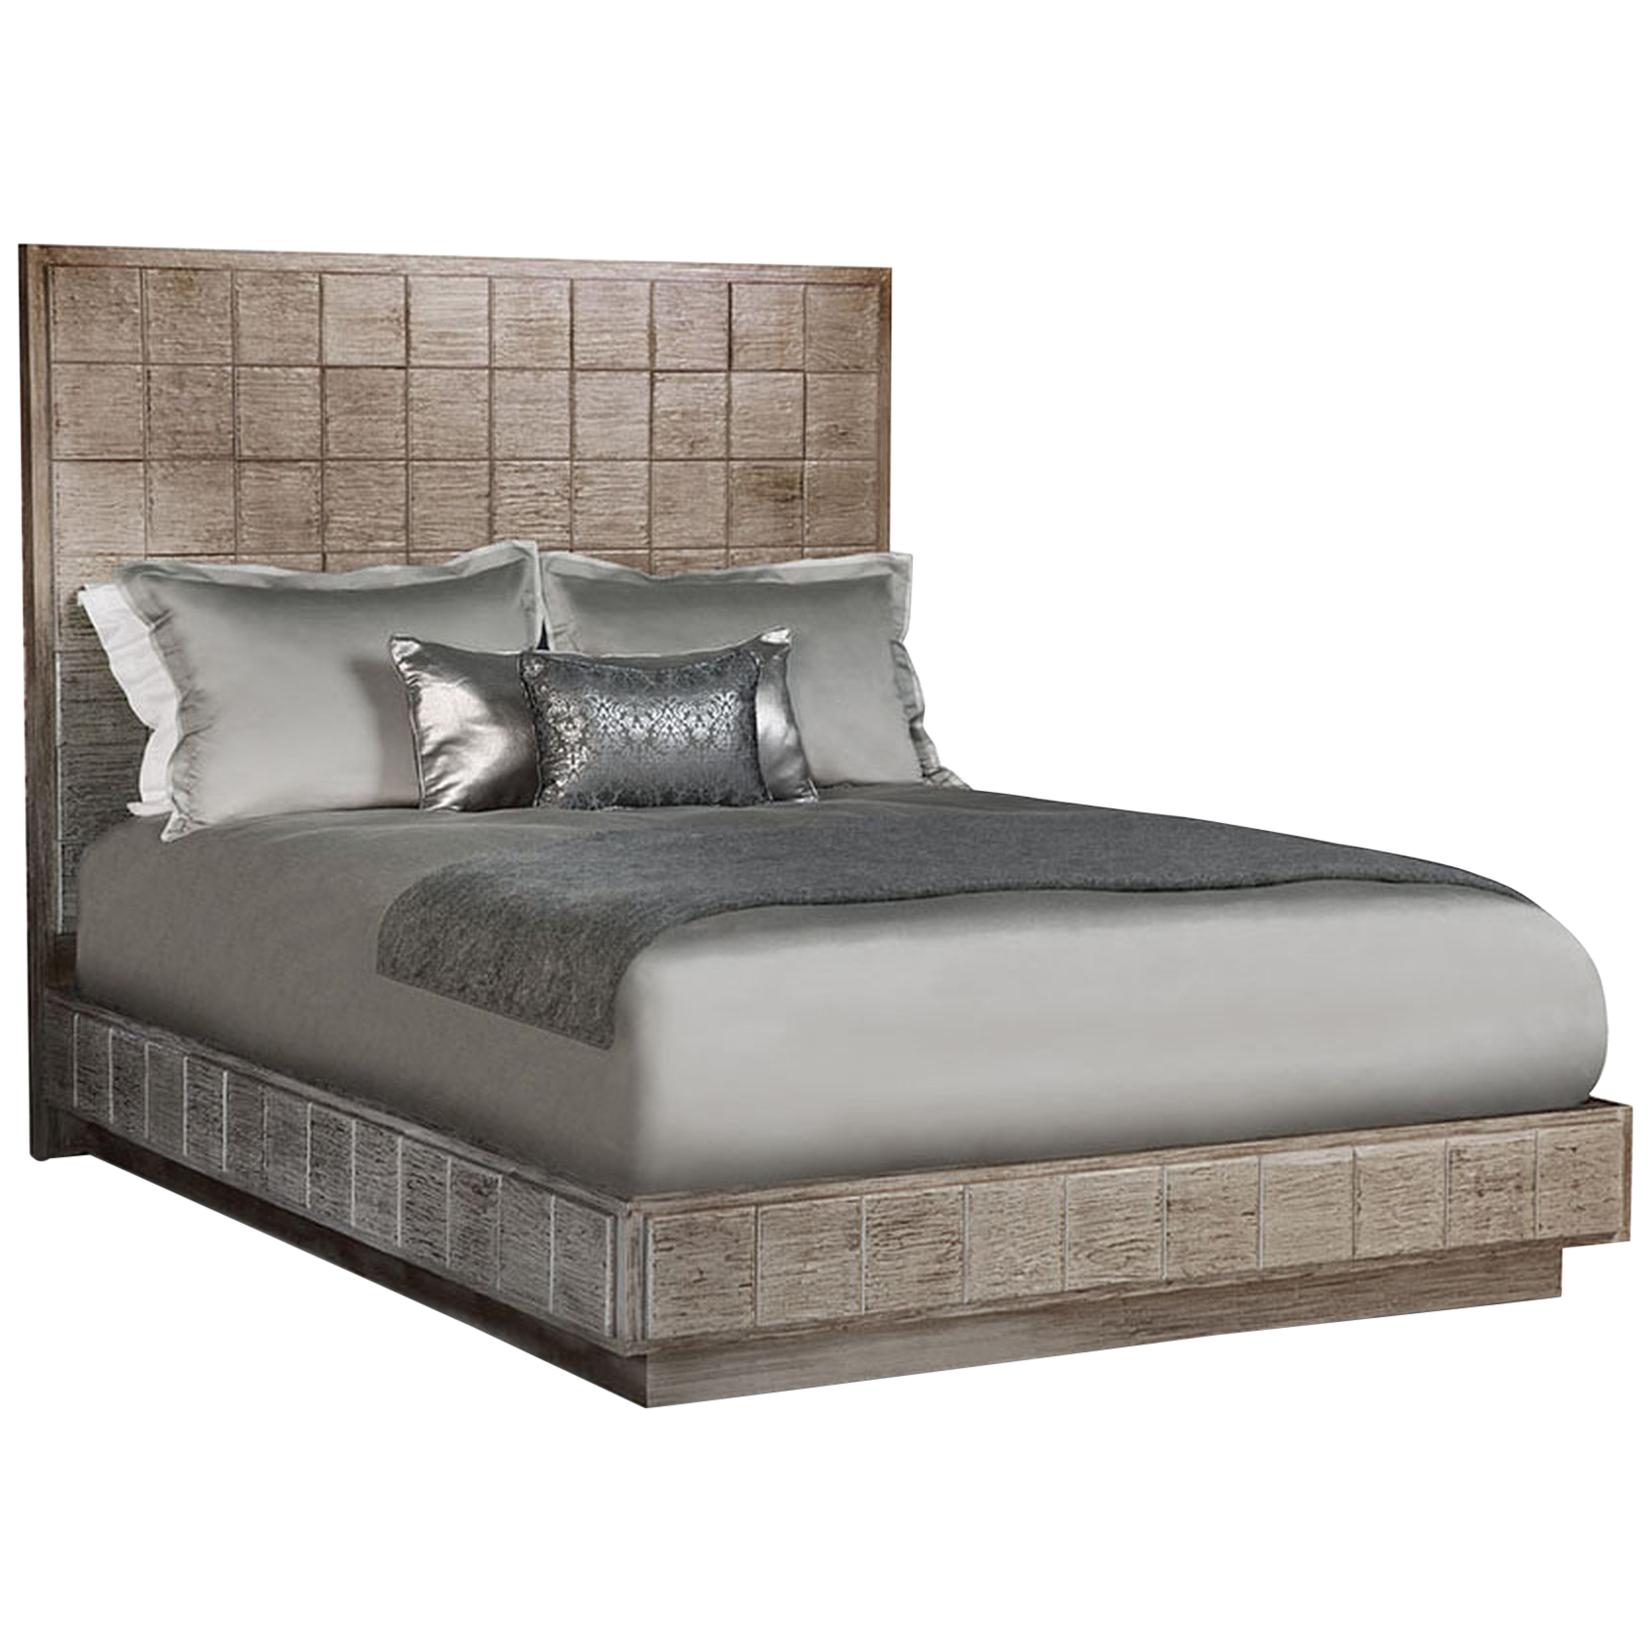 Mulholland Queen Bed in Lacquered Fog Gray by Innova Luxuxy Group For Sale